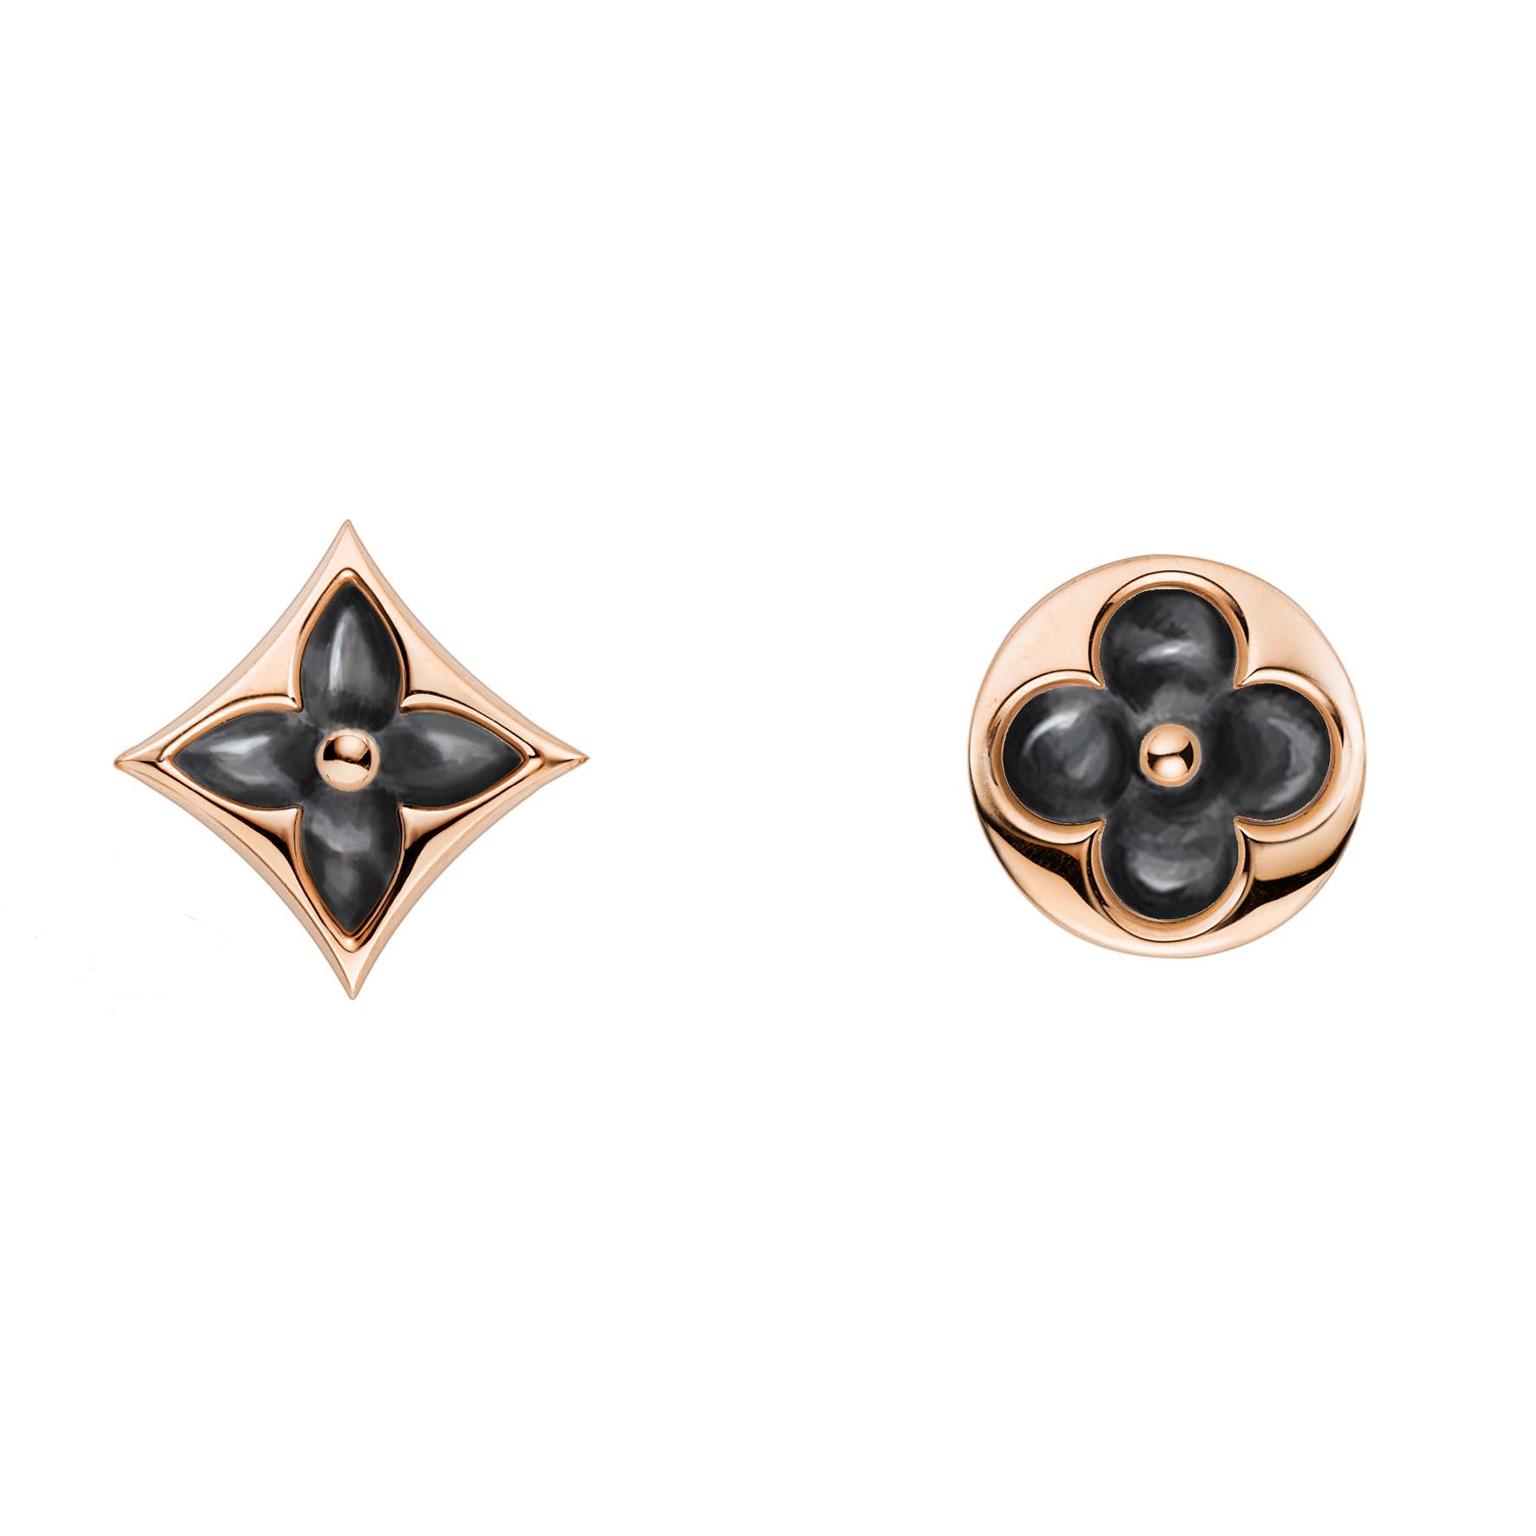 Louis Vuitton Blossom grey mother-of-pearl earrings